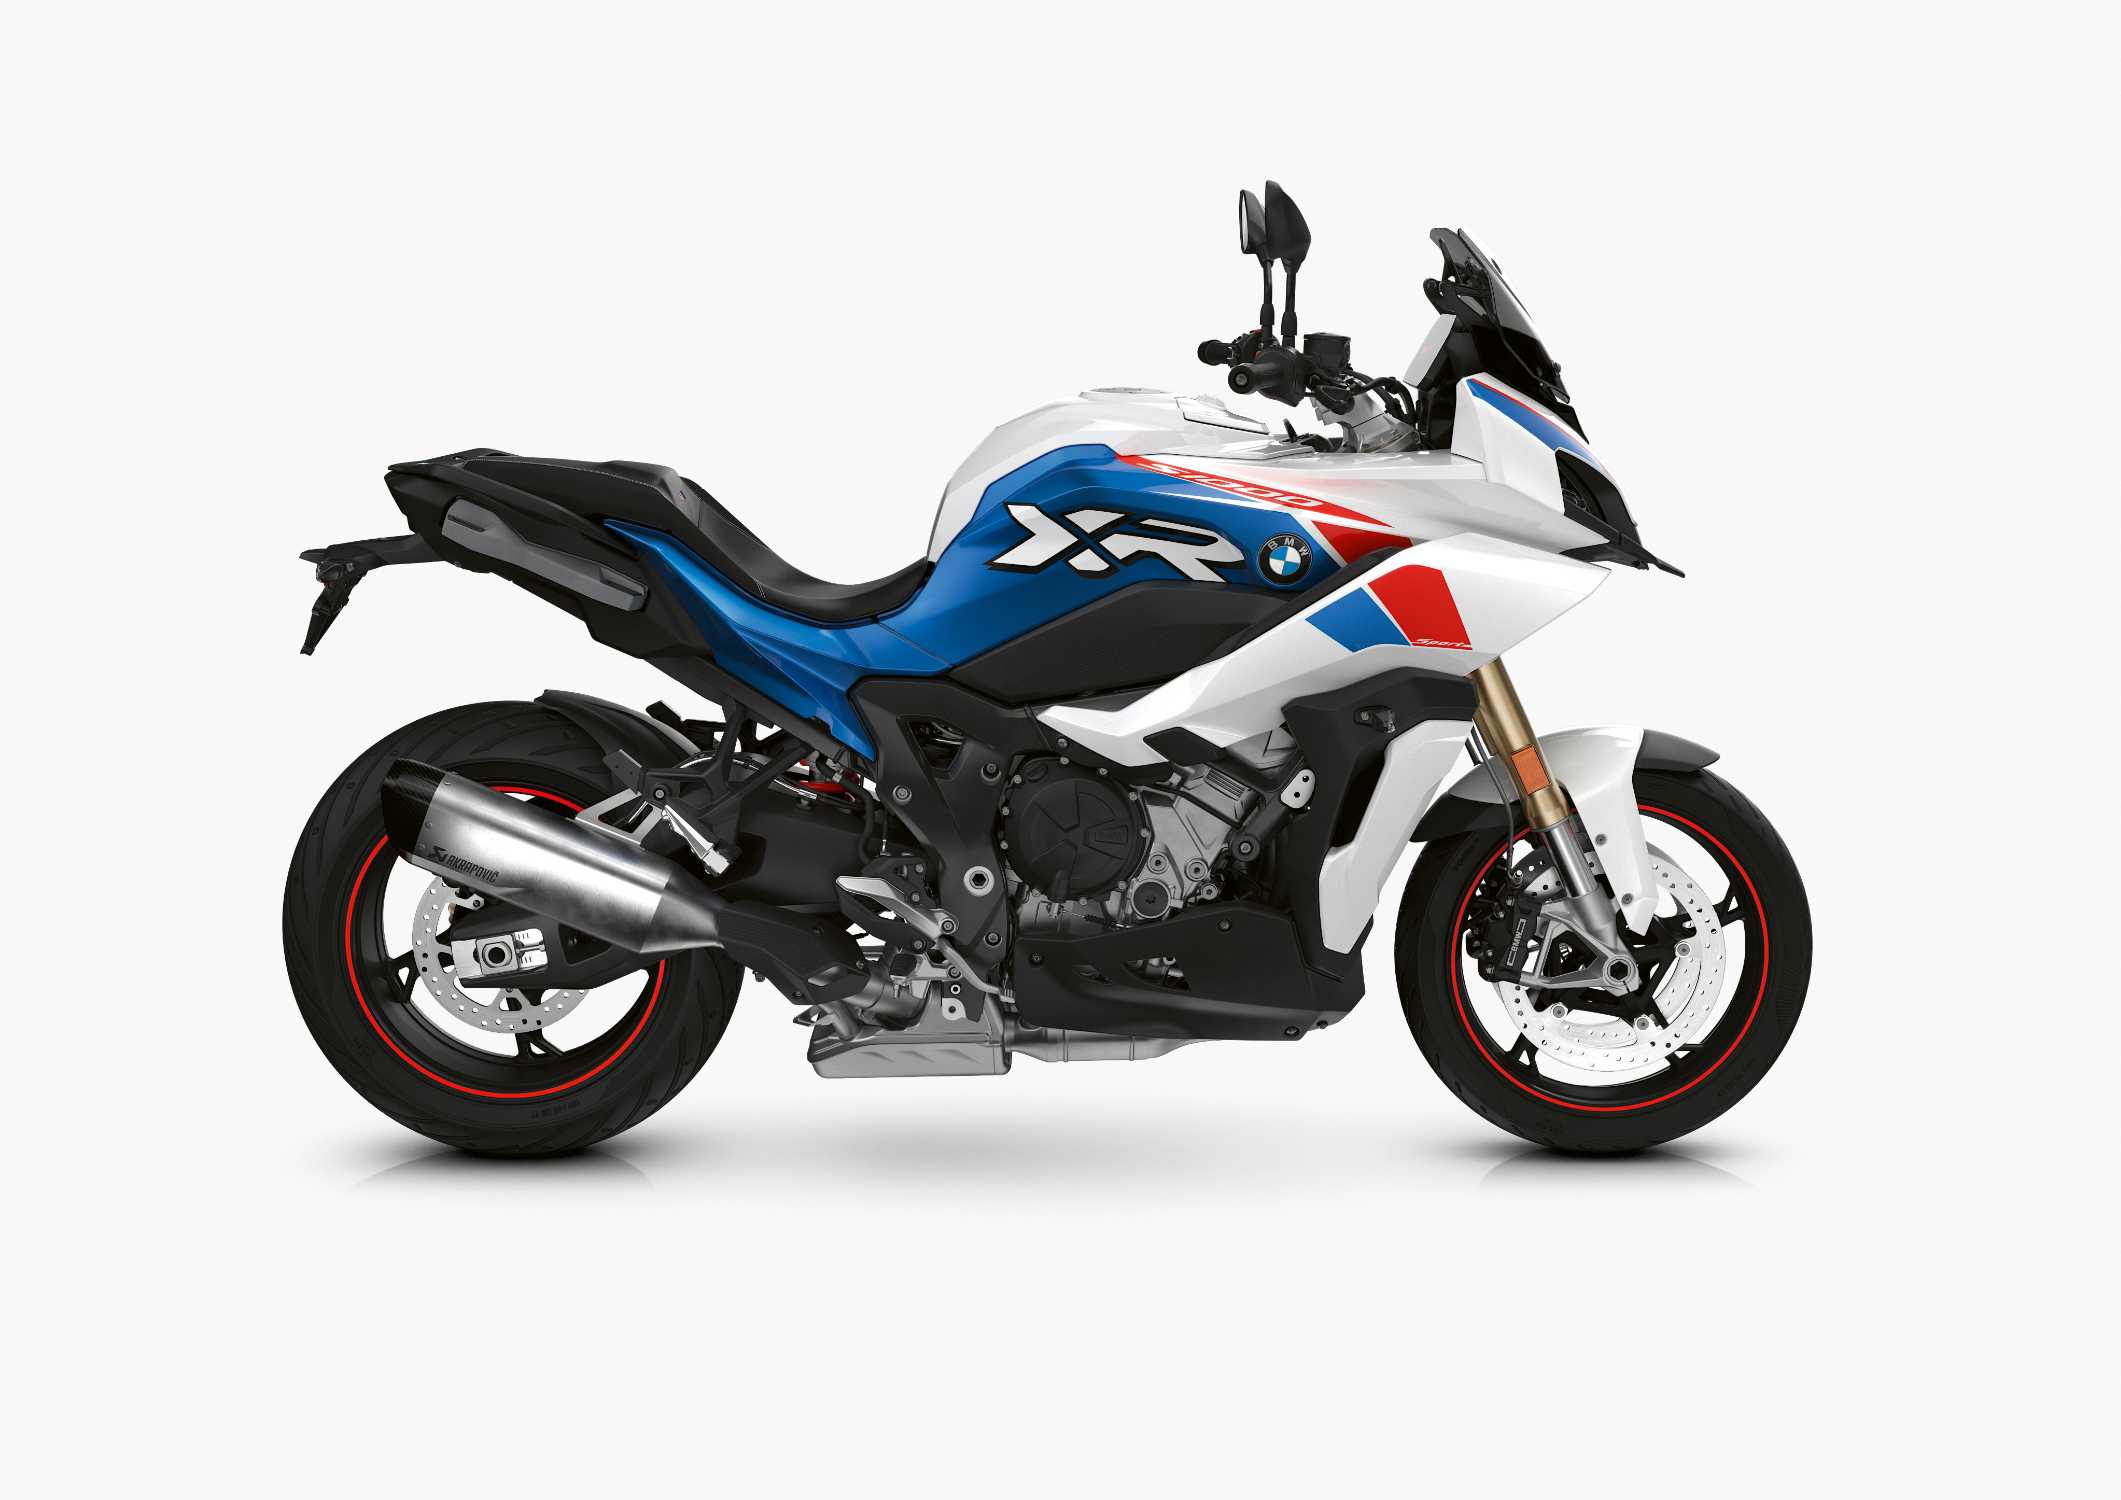 BMW Motorrad model revision measures for the model year 2021